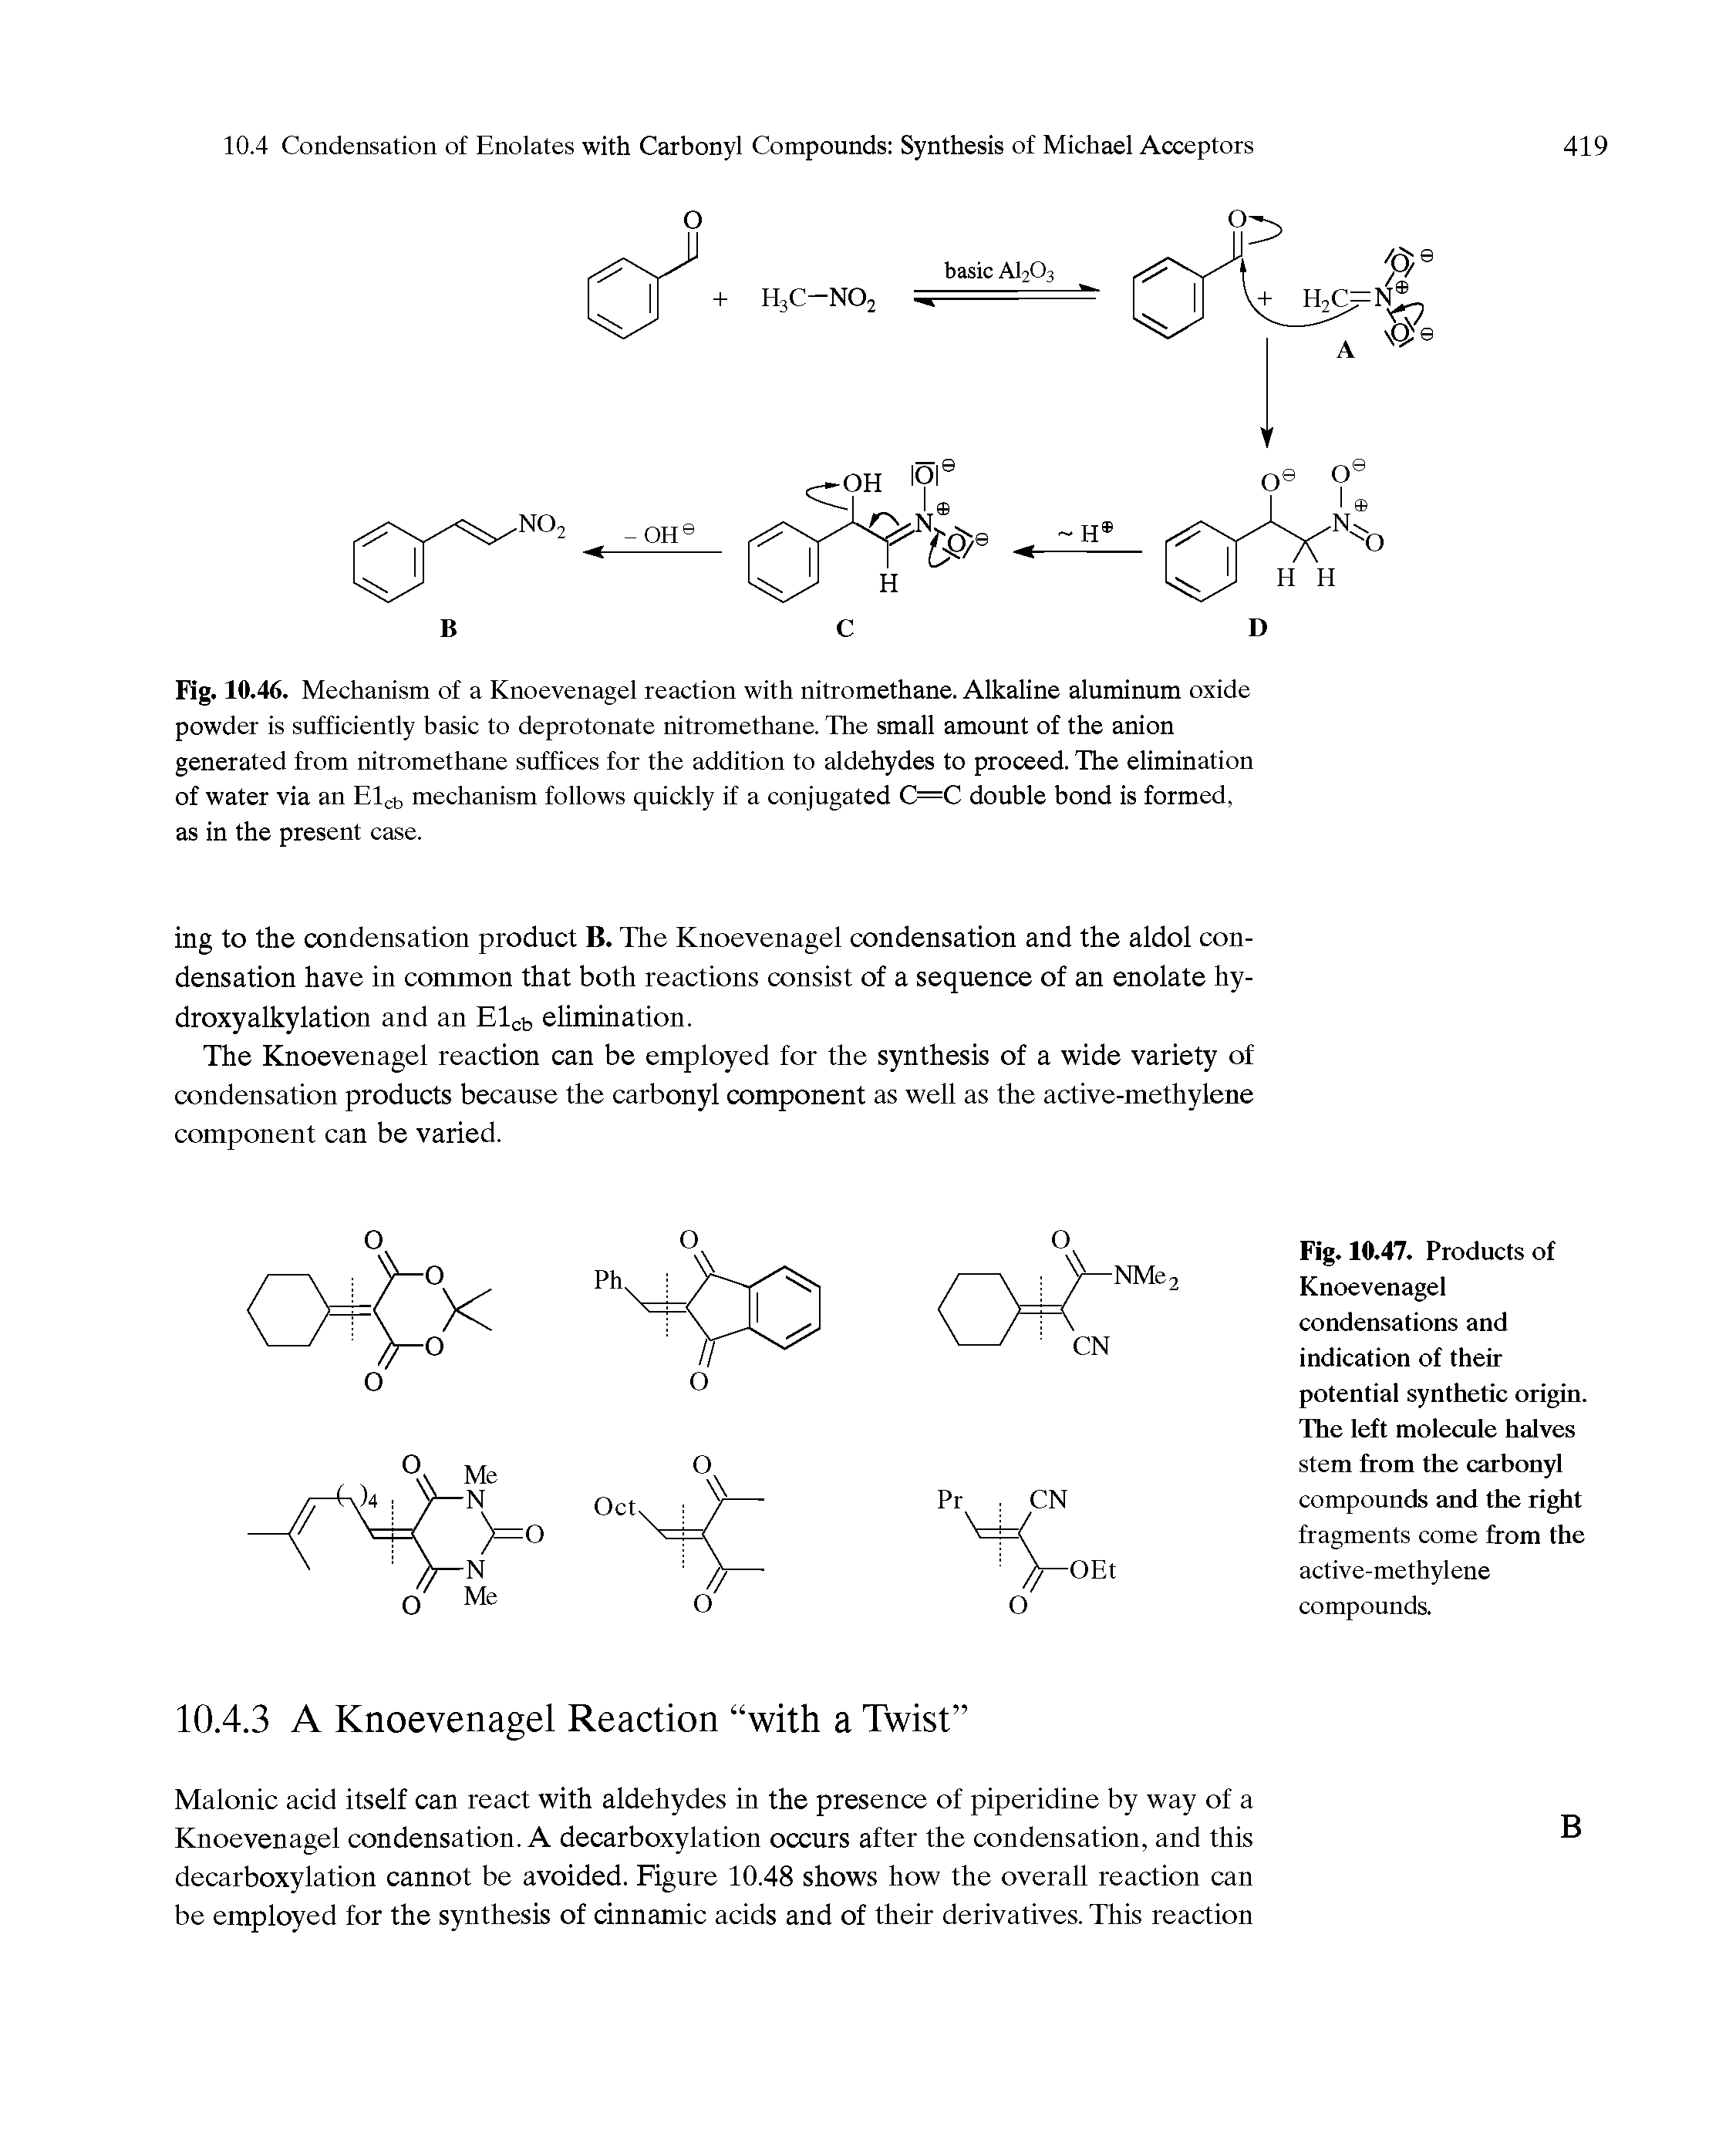 Fig. 10.46. Mechanism of a Knoevenagel reaction with nitromethane. Alkaline aluminum oxide powder is sufficiently basic to deprotonate nitromethane. The small amount of the anion generated from nitromethane suffices for the addition to aldehydes to proceed. The elimination of water via an Elcb mechanism follows quickly if a conjugated C=C double bond is formed, as in the present case.